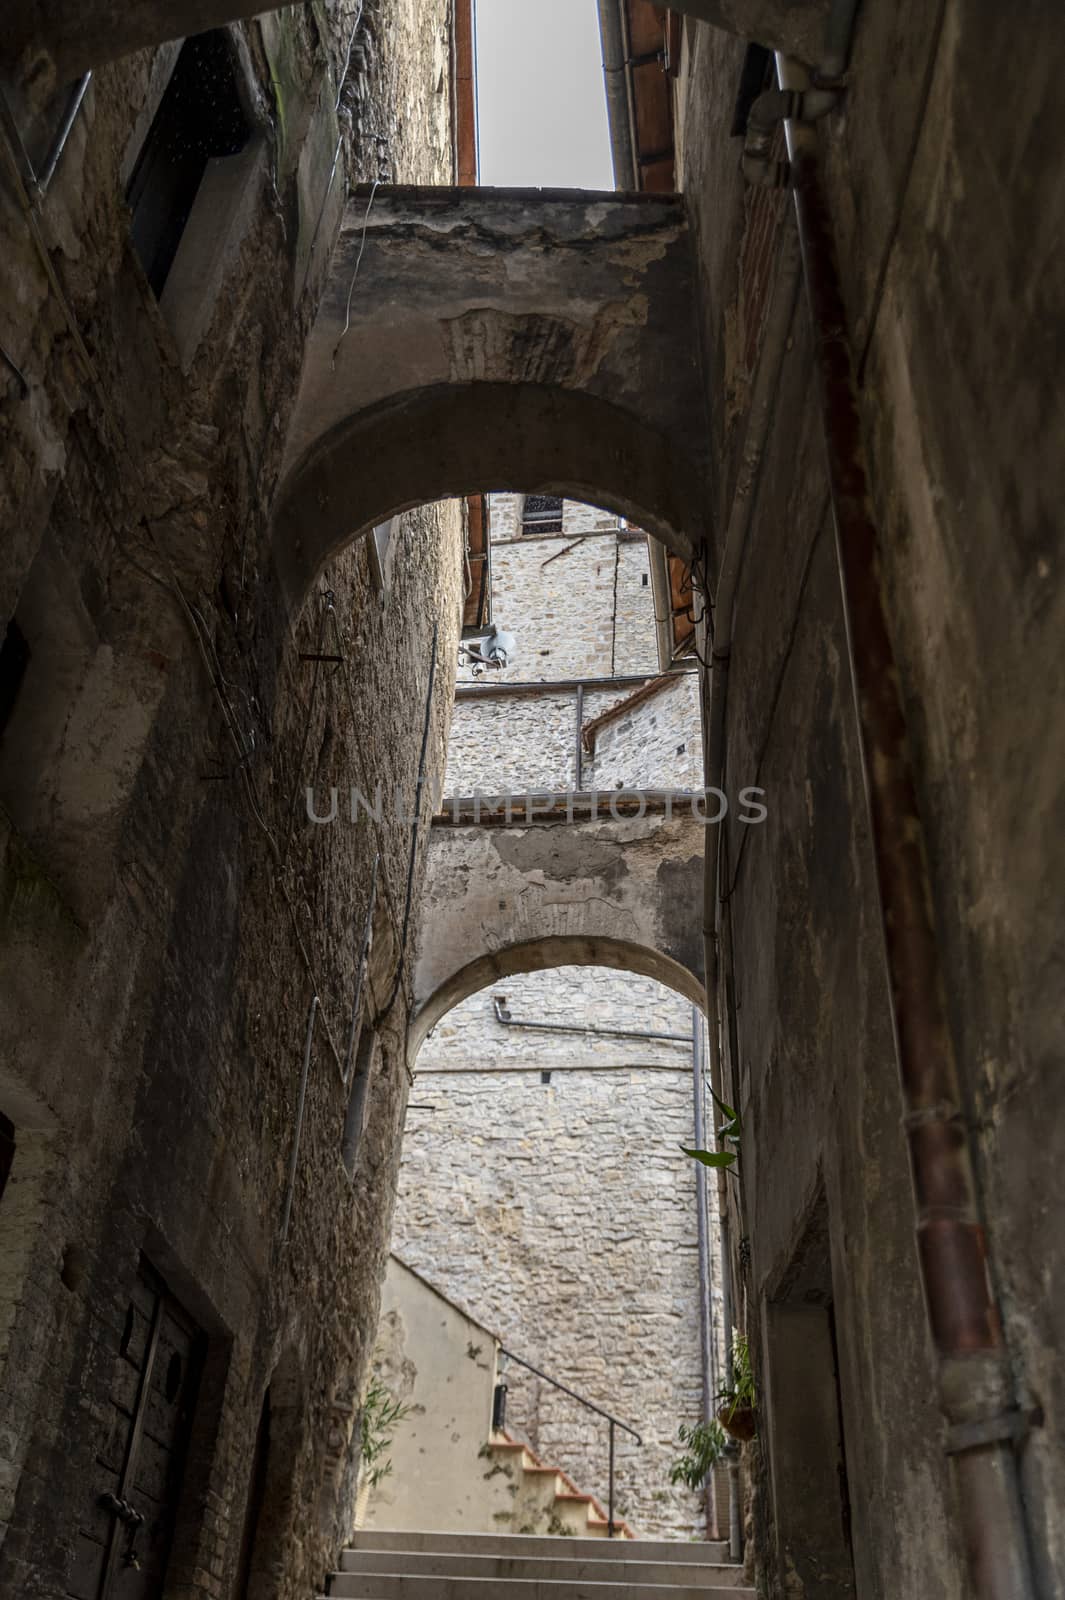 architecture of glimpses of the narrow streets of the town of Papigno by carfedeph